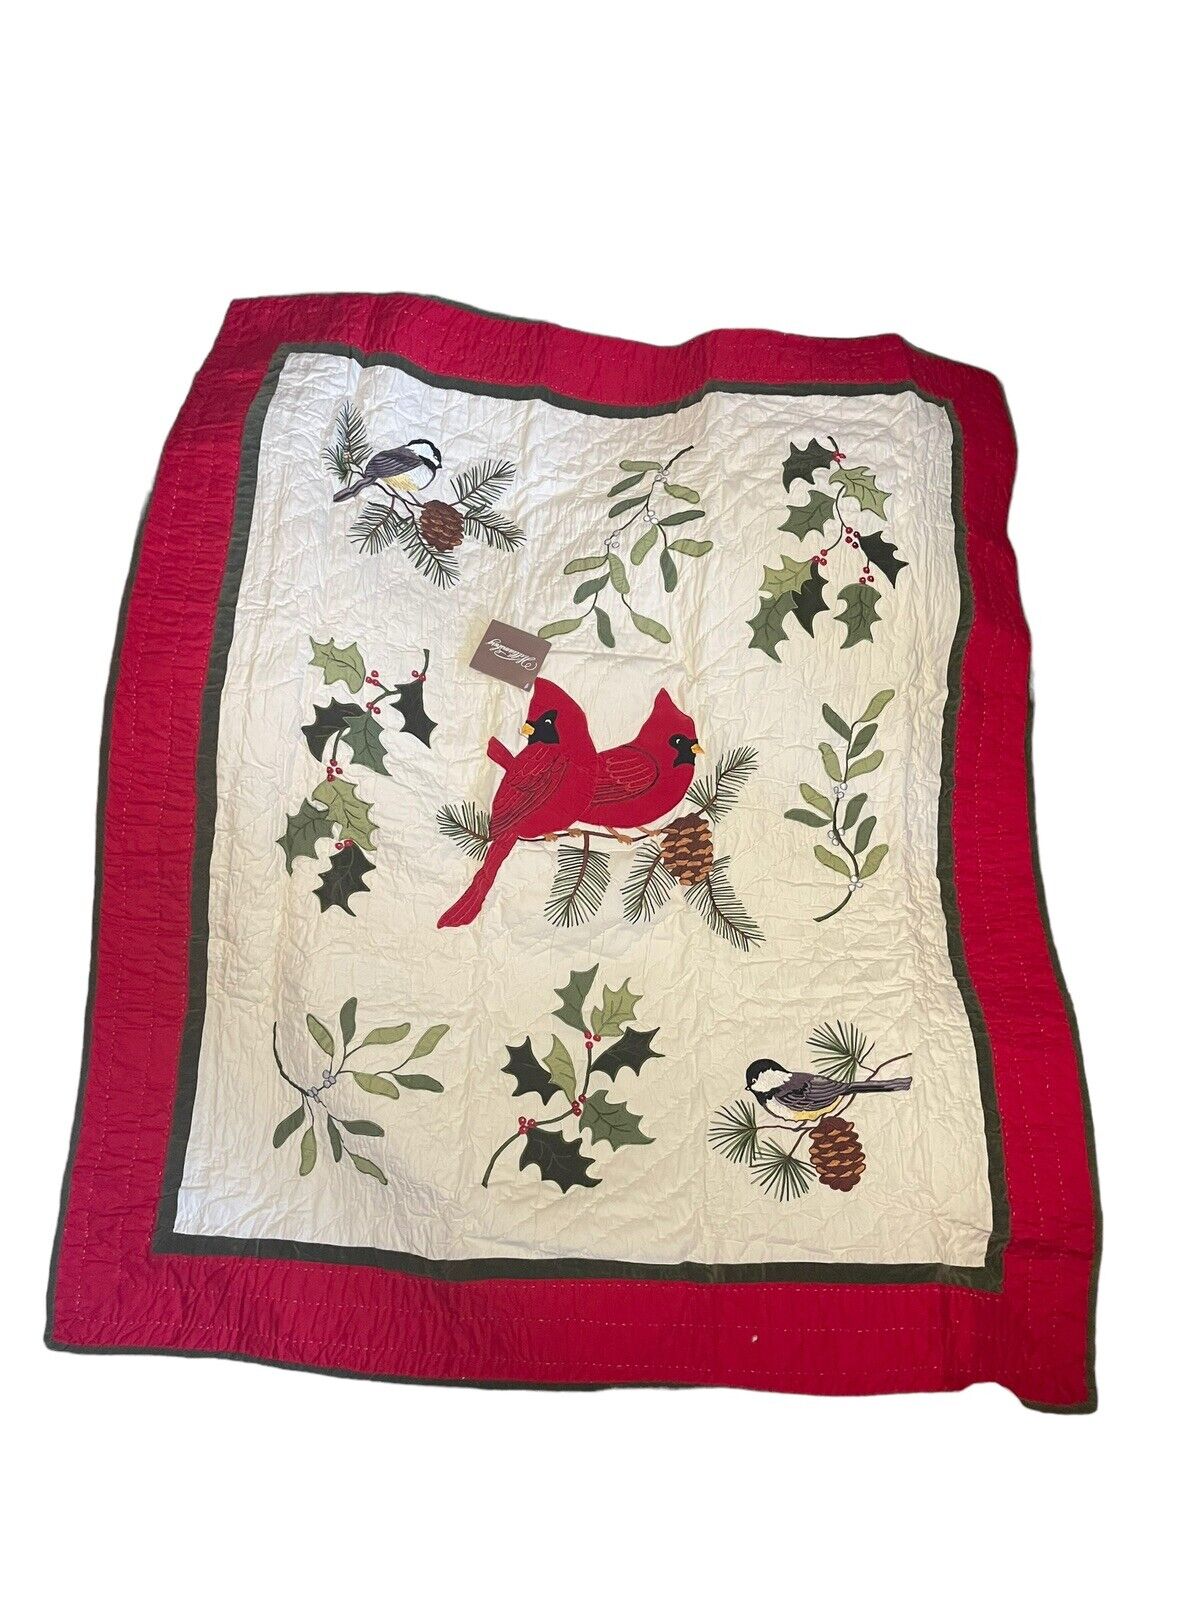 C&F Original Handcrafted 100%Cotton Filled Quilted Throw Red Cardinal Bird 50x60 Handcrafted